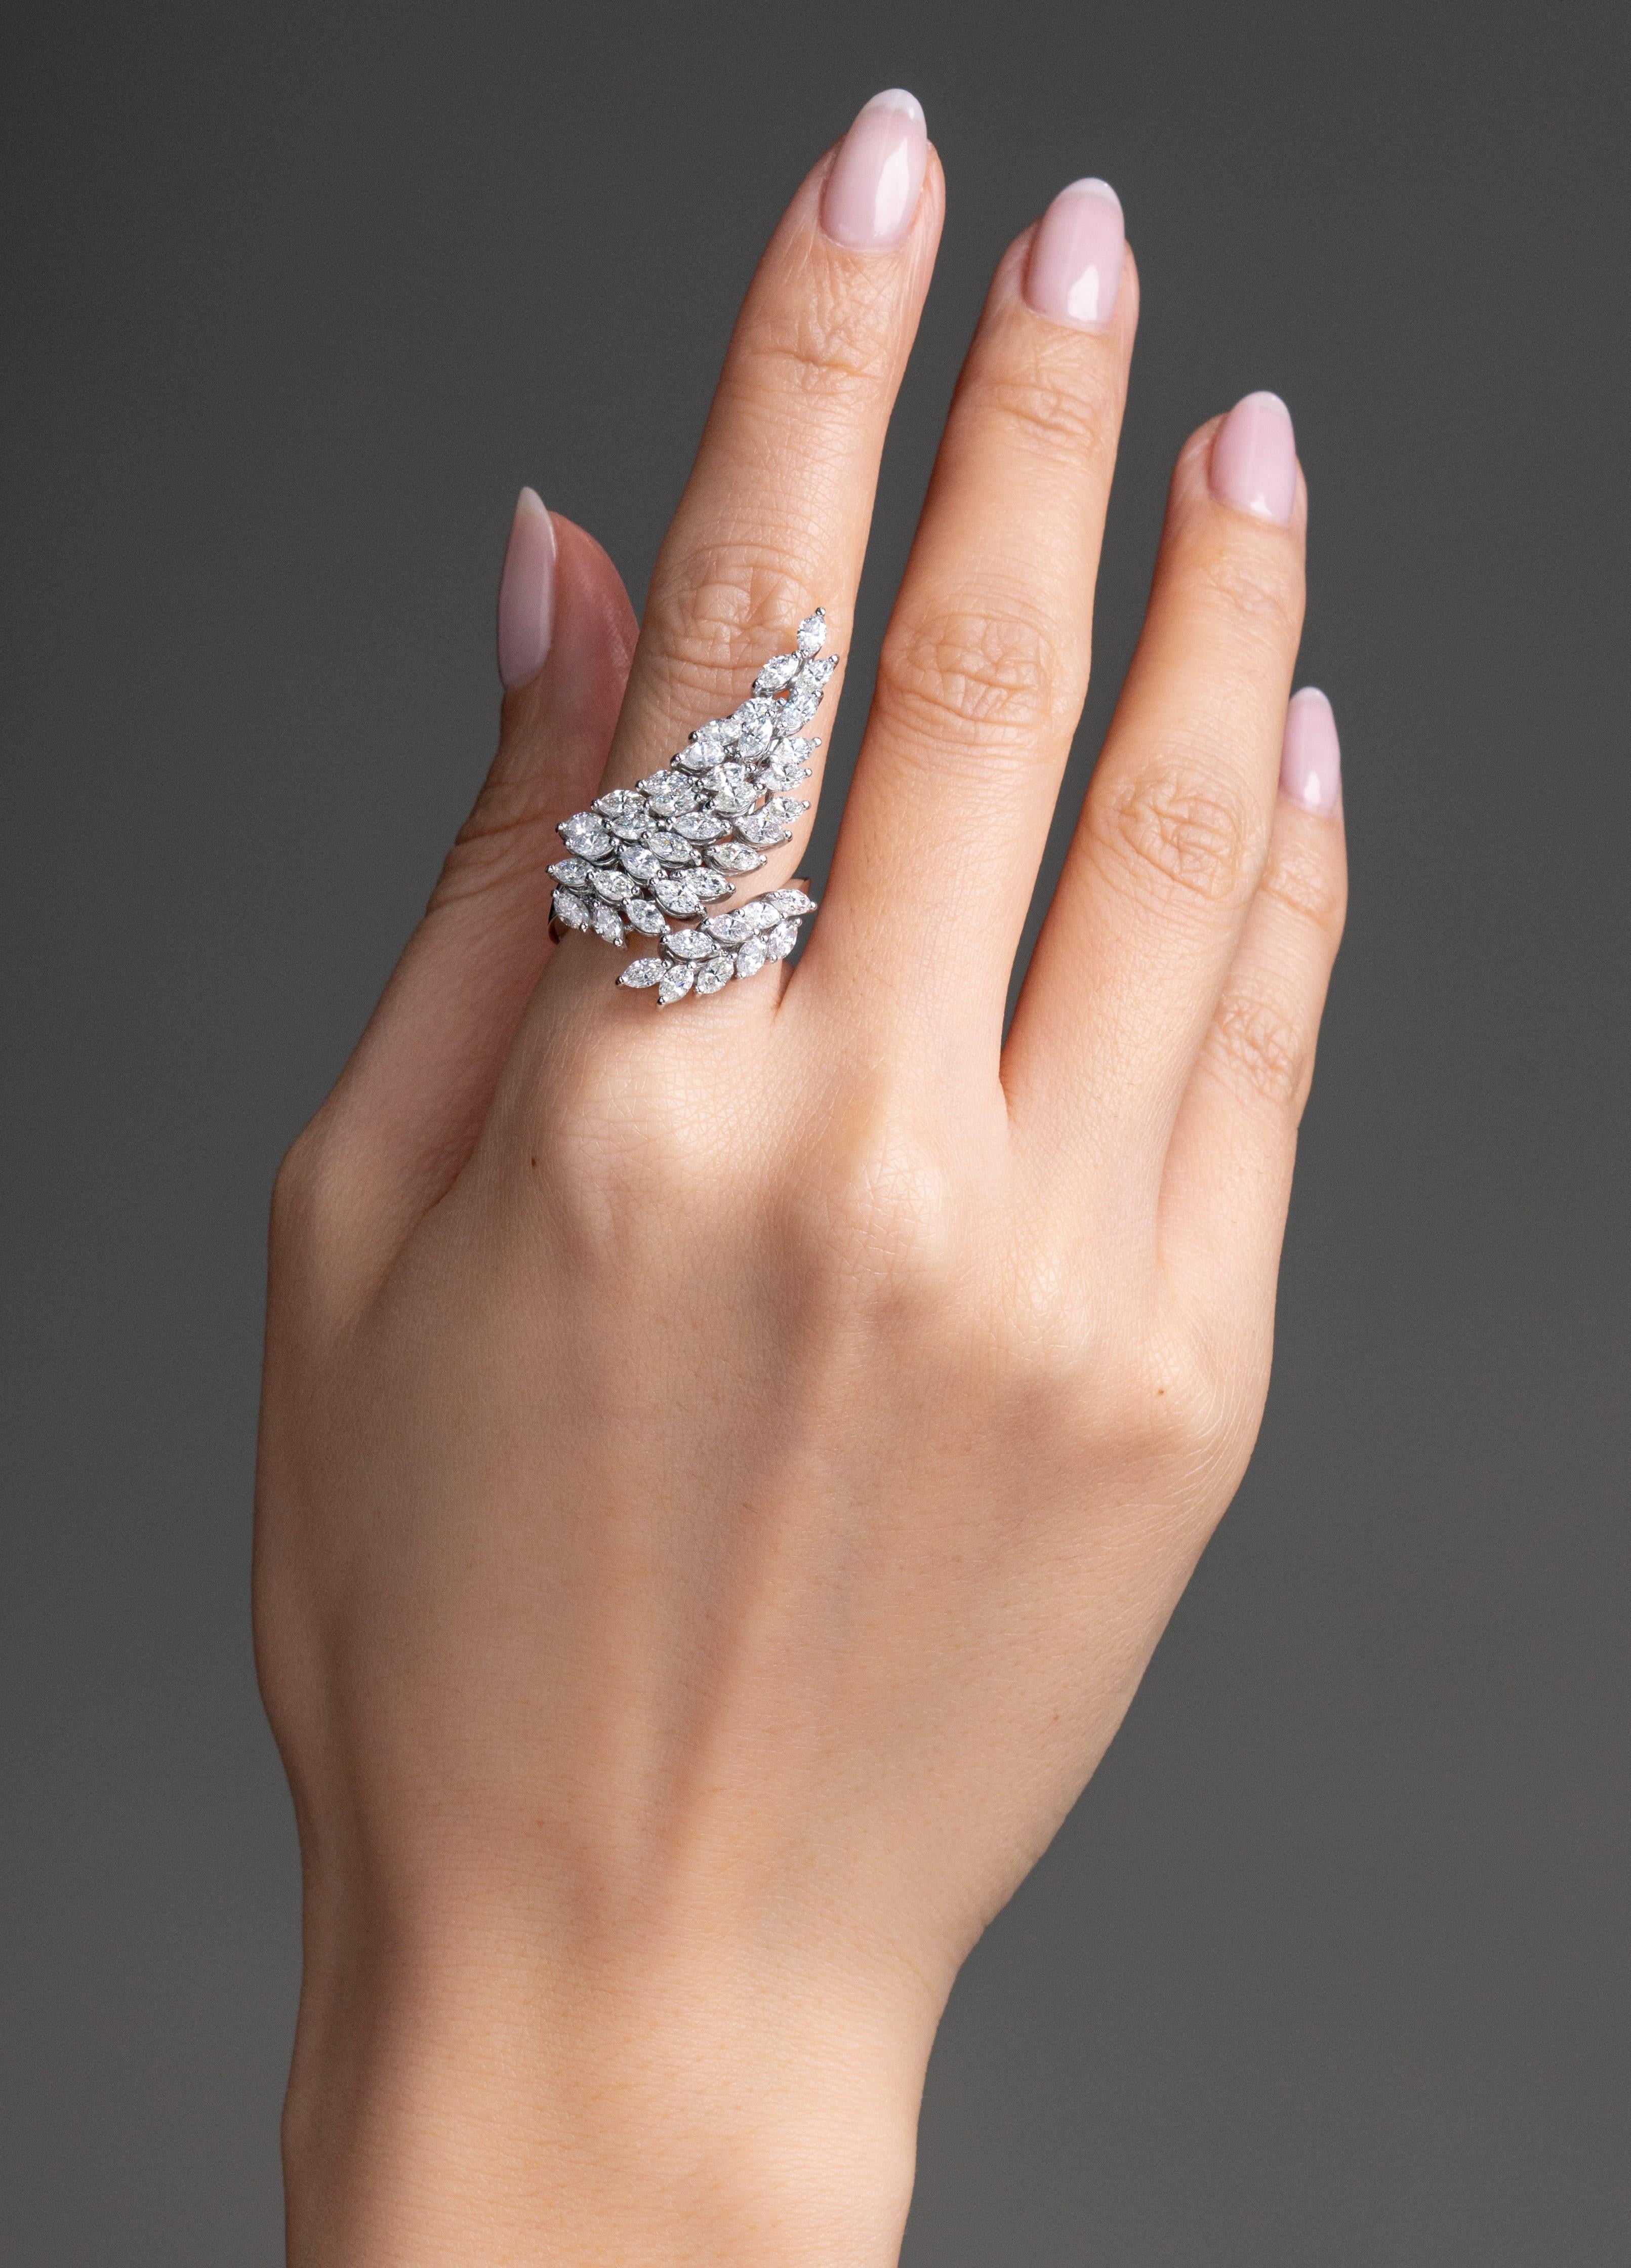 Inspired by angel wings, this Vihari Jewels marquise shaped diamond ring wraps the finger delicately and makes a fashionable statement! The diamond ring is set in 18K White Gold and features 3.68 carats of diamonds (all F color, VS+ clarity). The